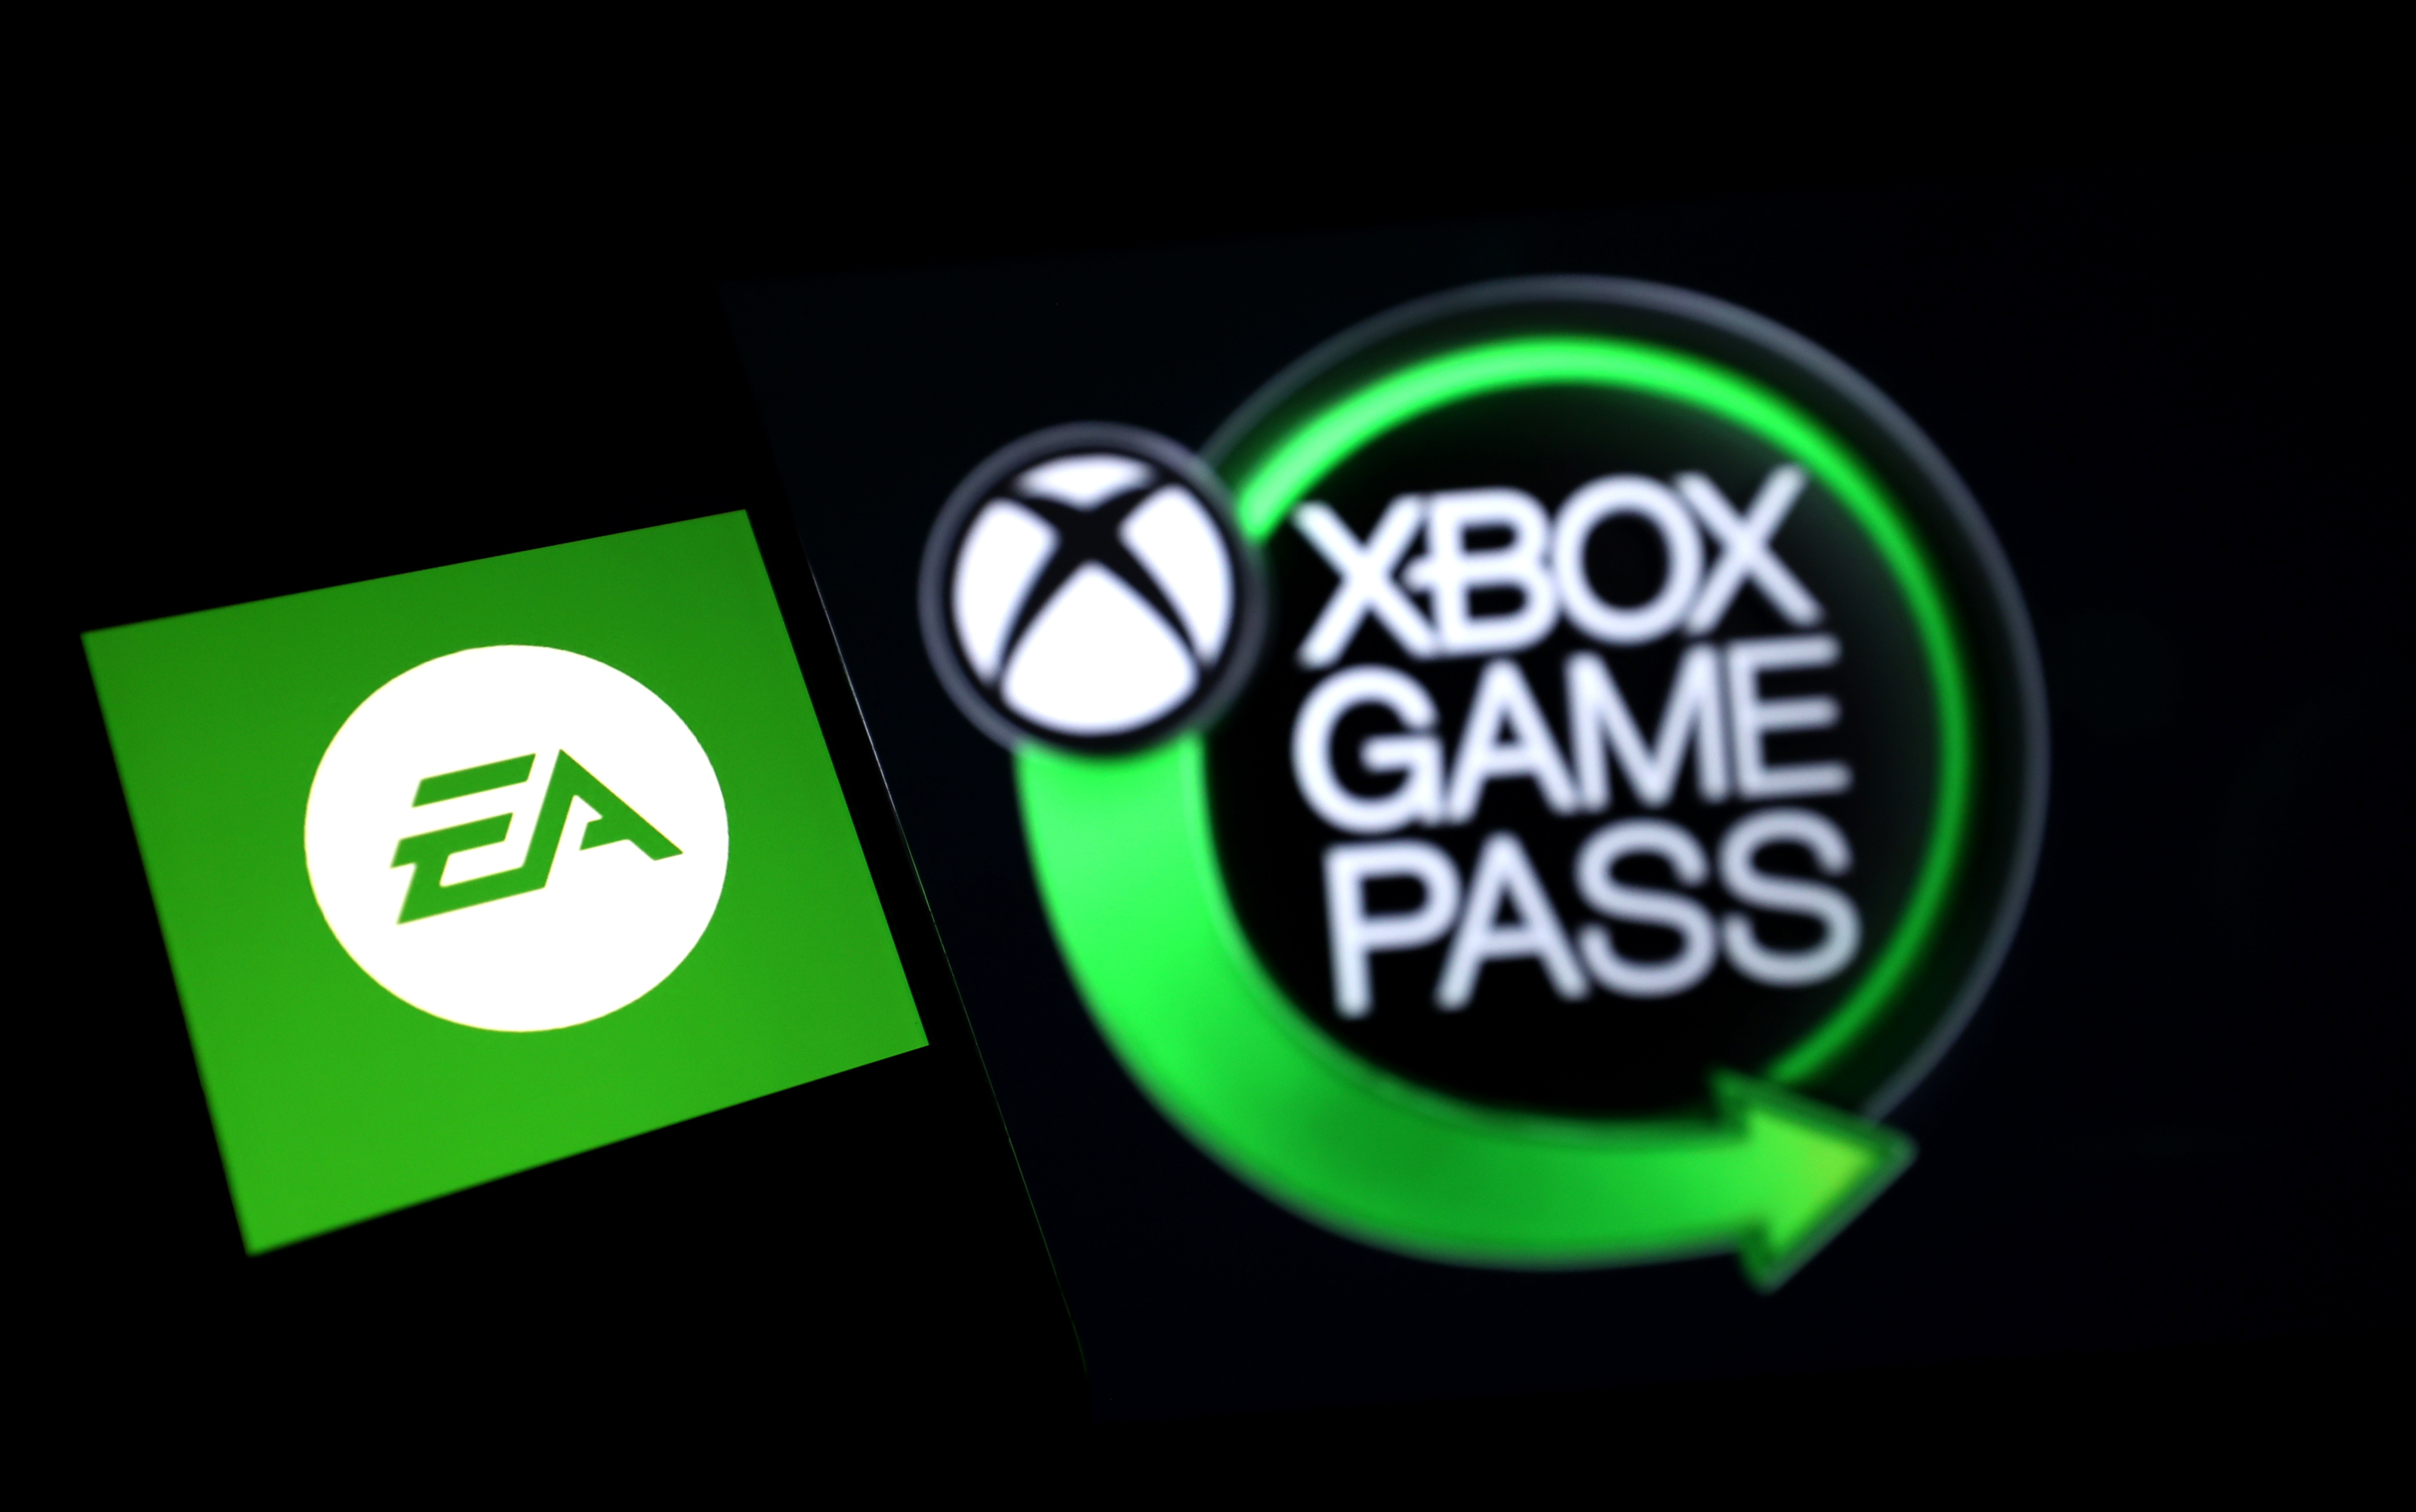 Xbox Game Pass will reportedly get a family plan